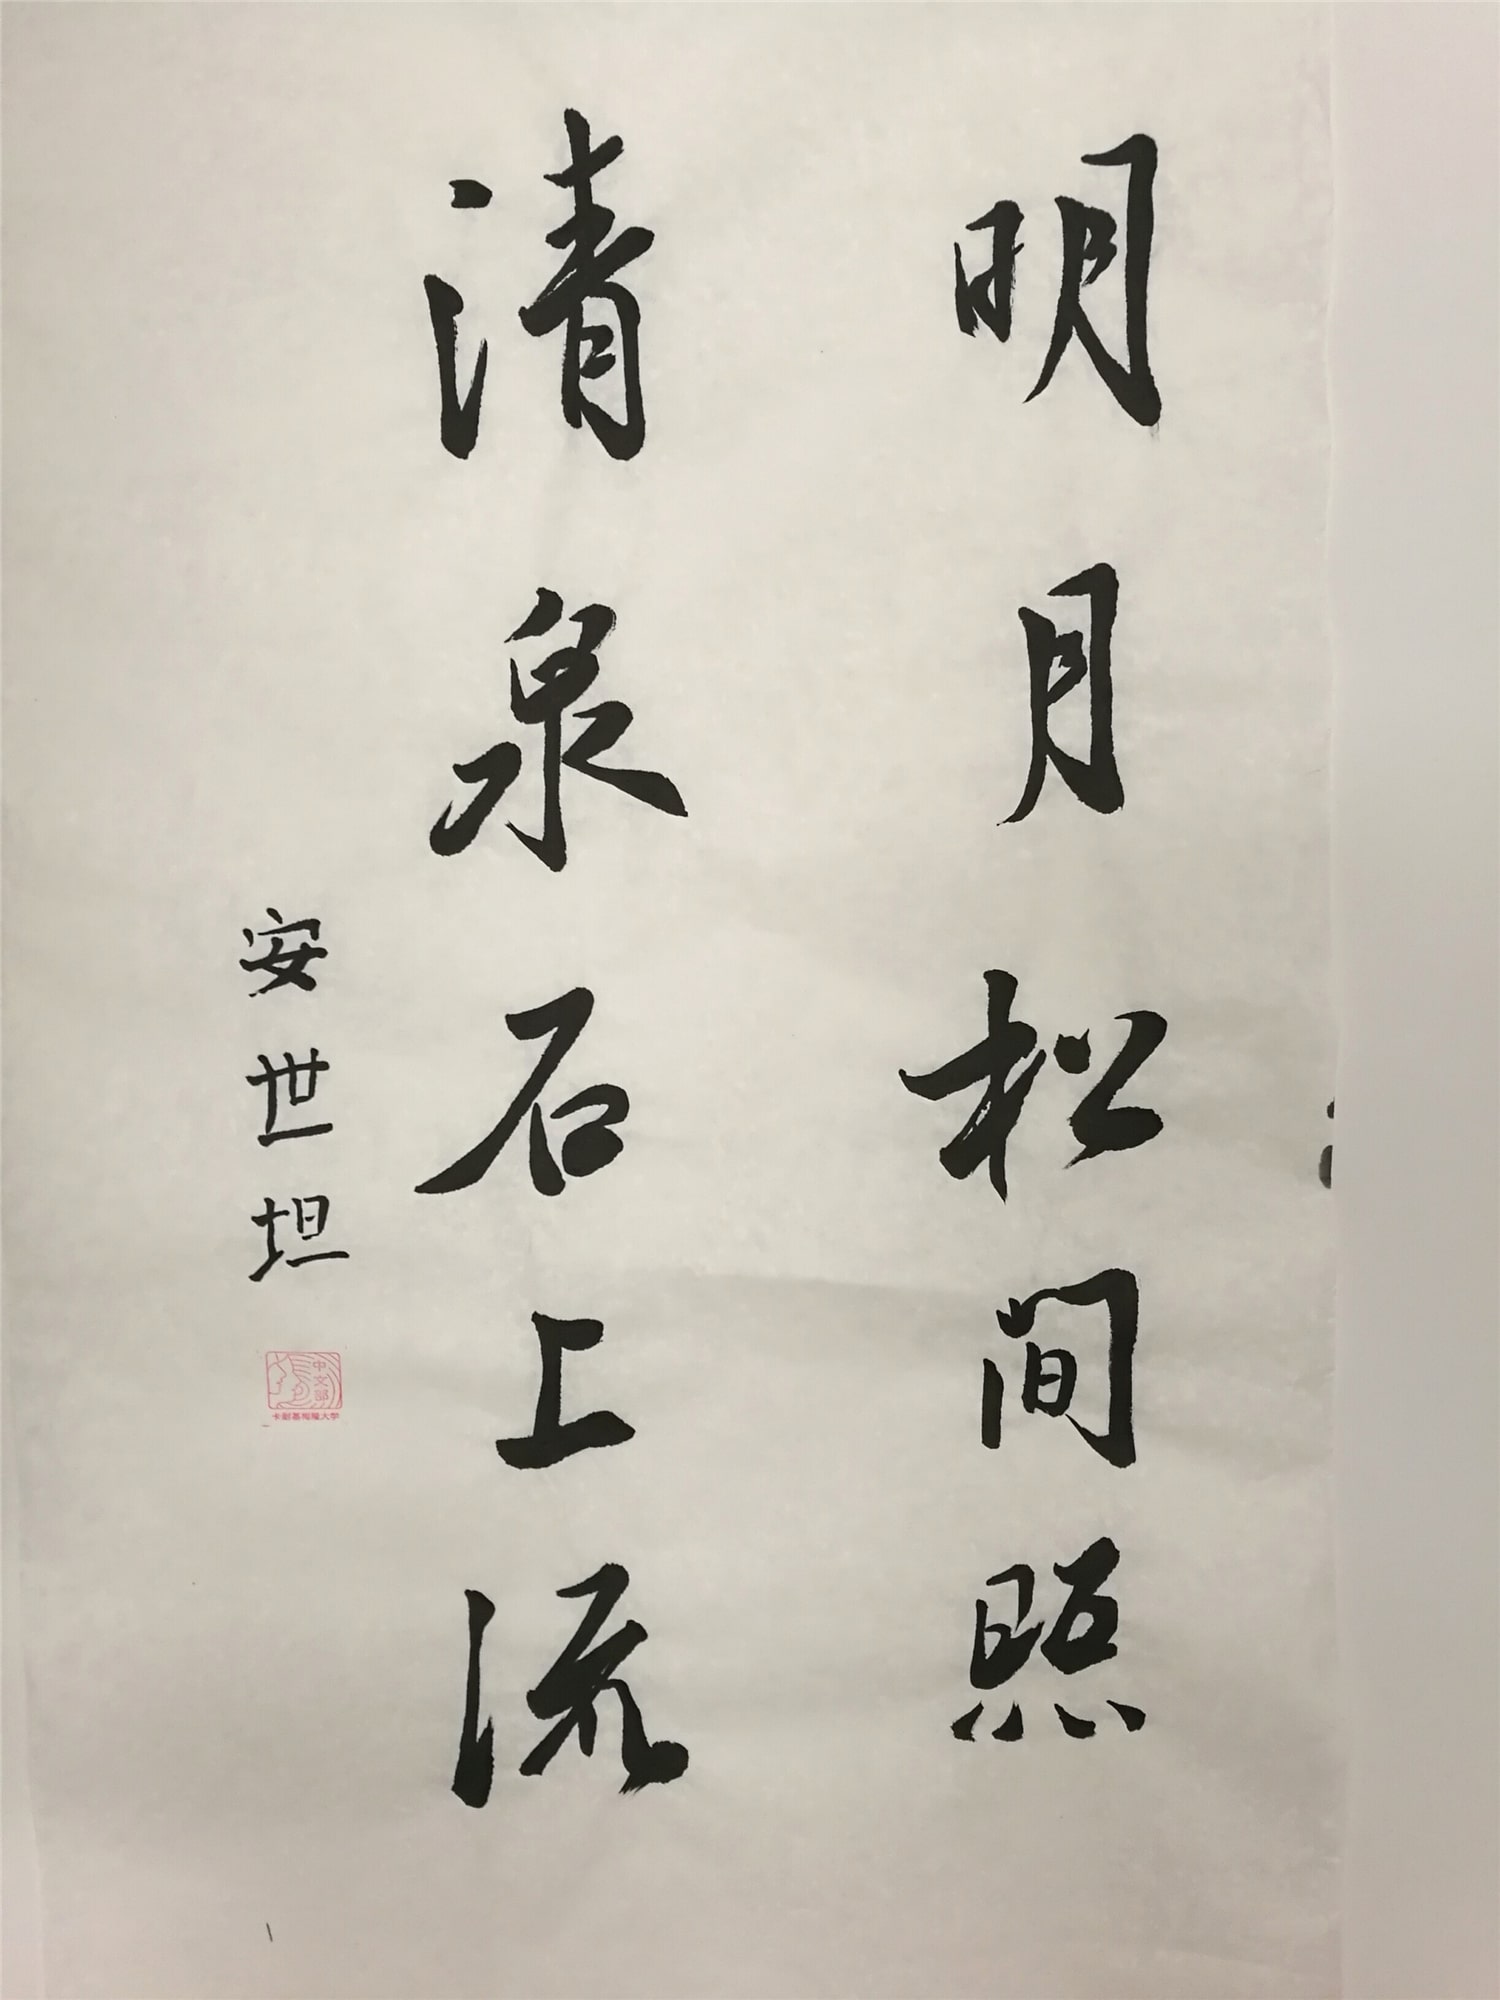 Chinese calligraphy by Cotey Anderegg